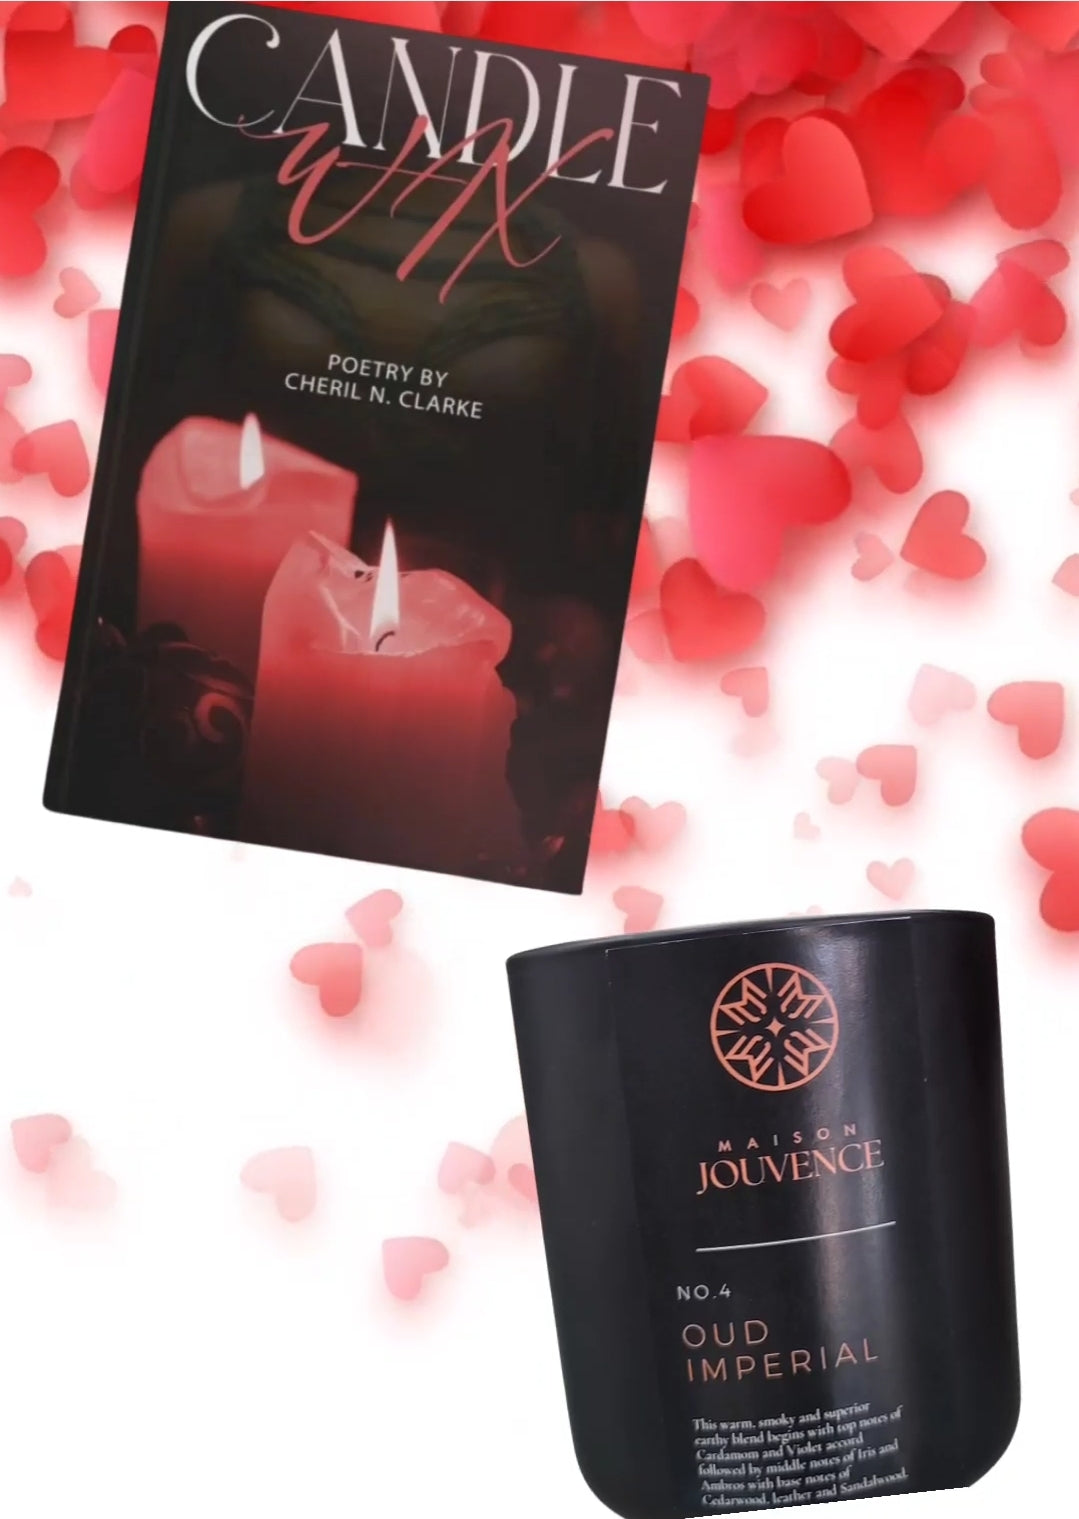 Candle & Poetry book bundle!